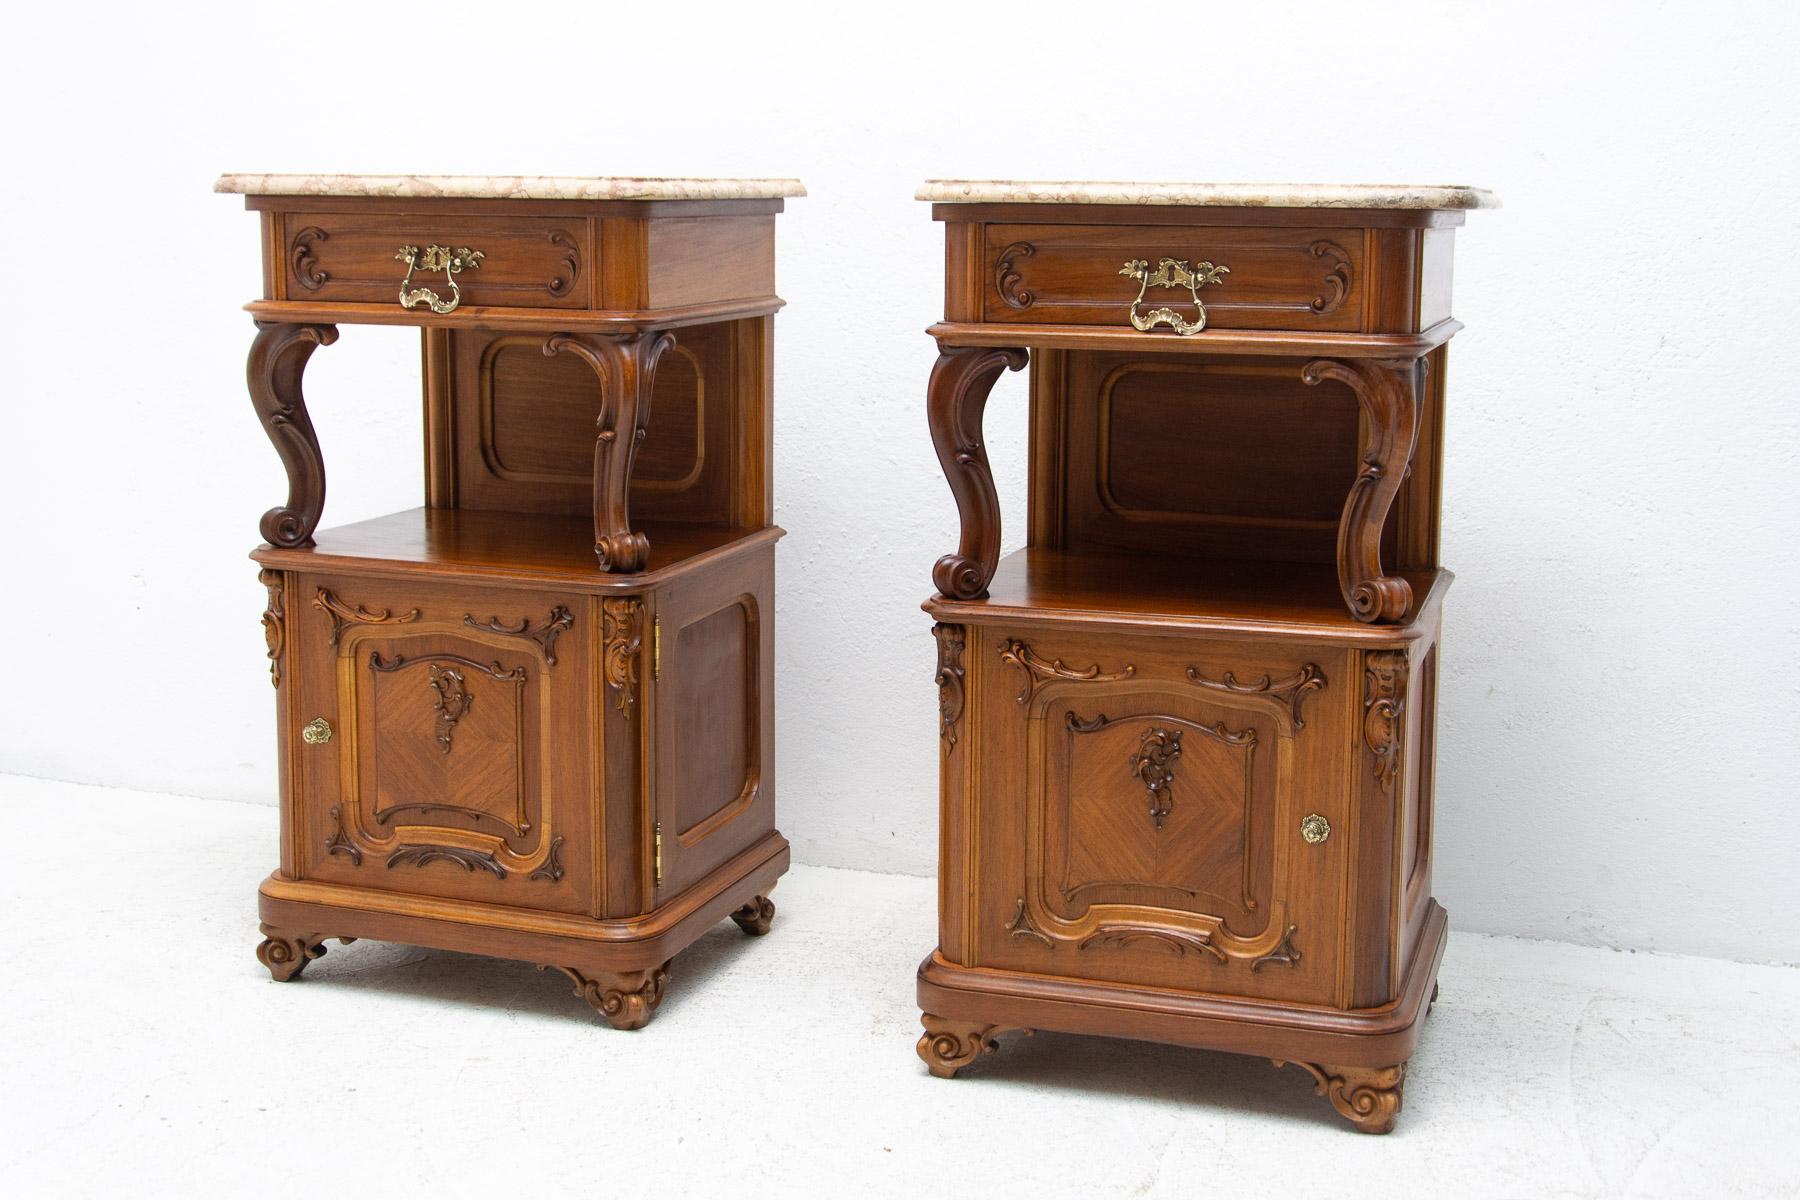 Austrian Pair of Fully Restored Historicist Bedside Tables, 1910, Austria For Sale